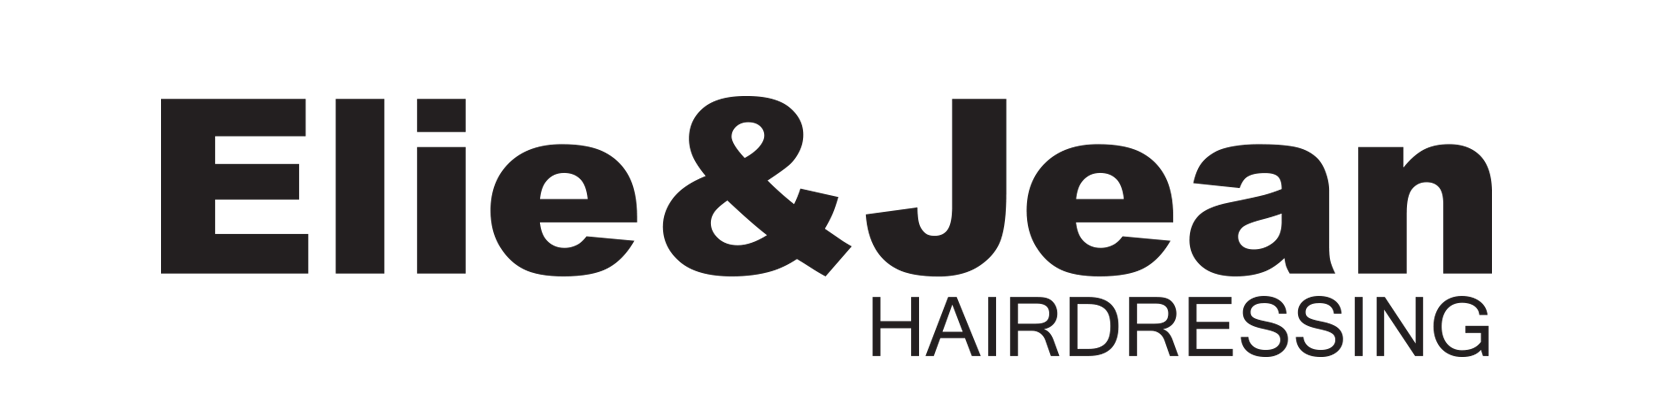 Elie and Jean logo